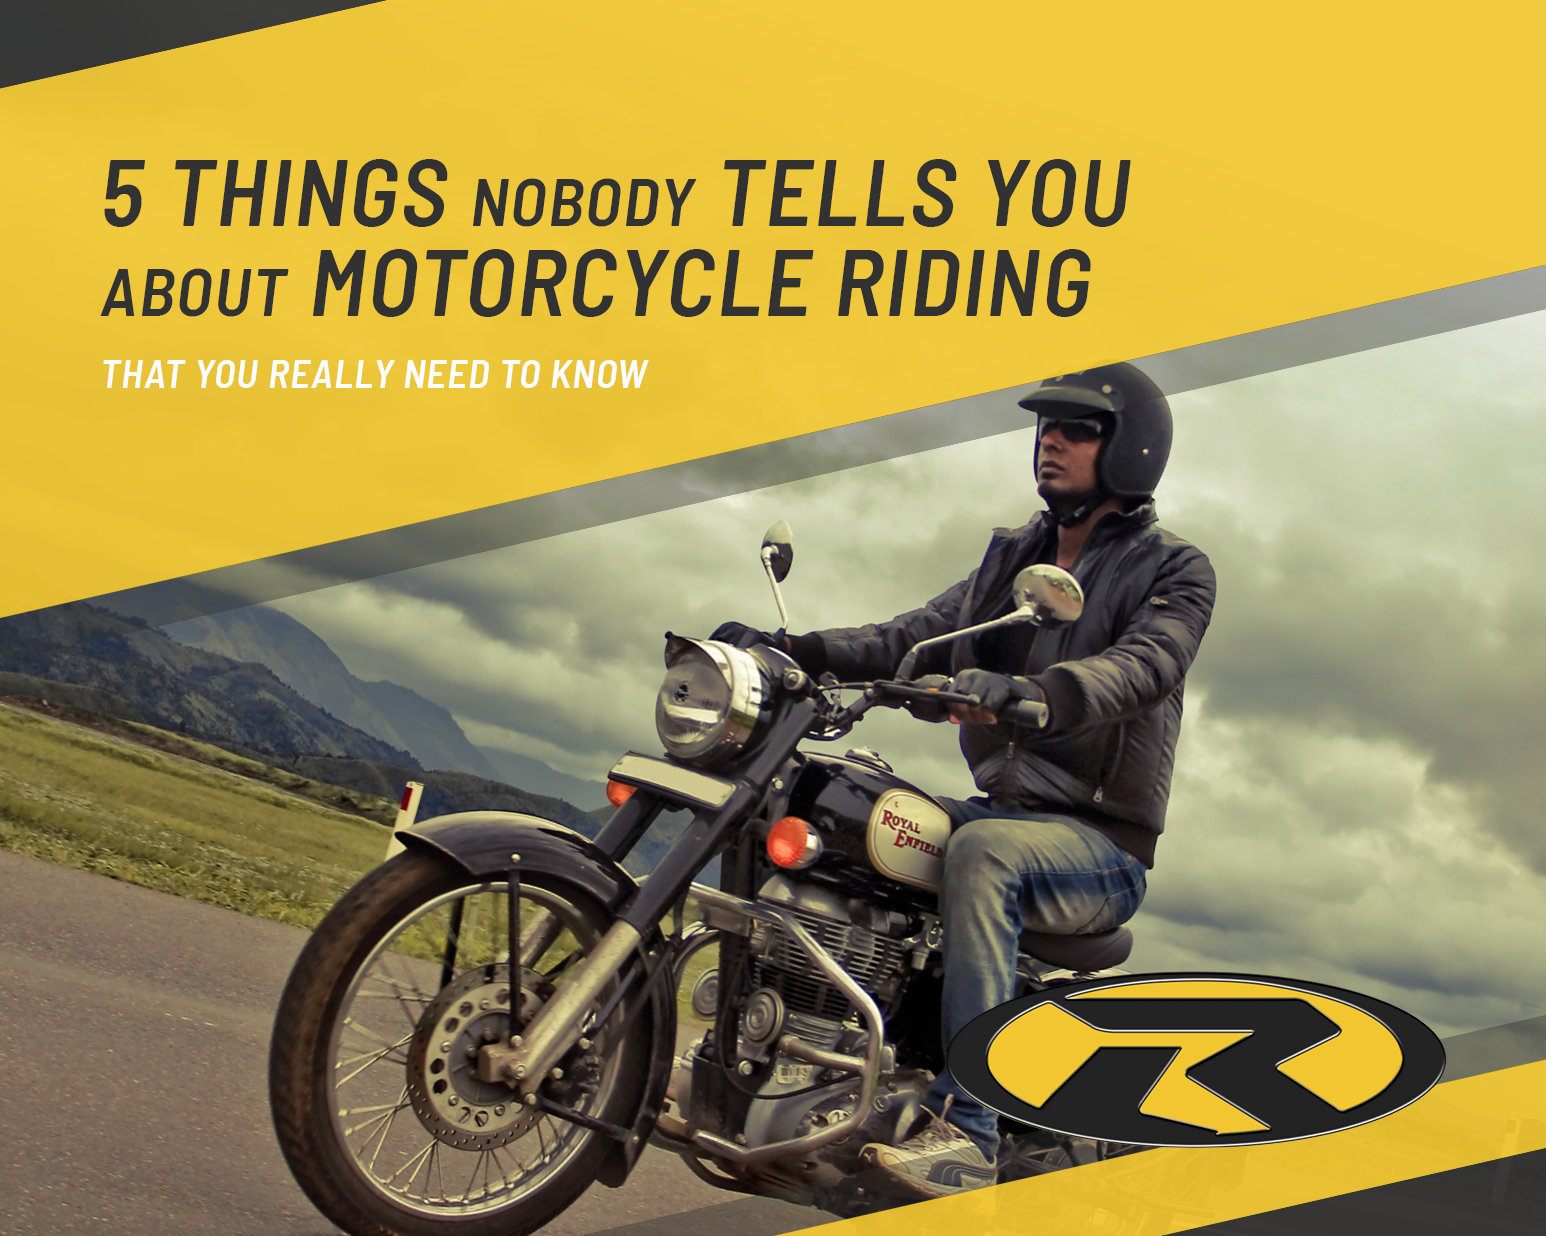 5 Things Nobody Tells You About Motorcycle Riding, That You Really Need To Know